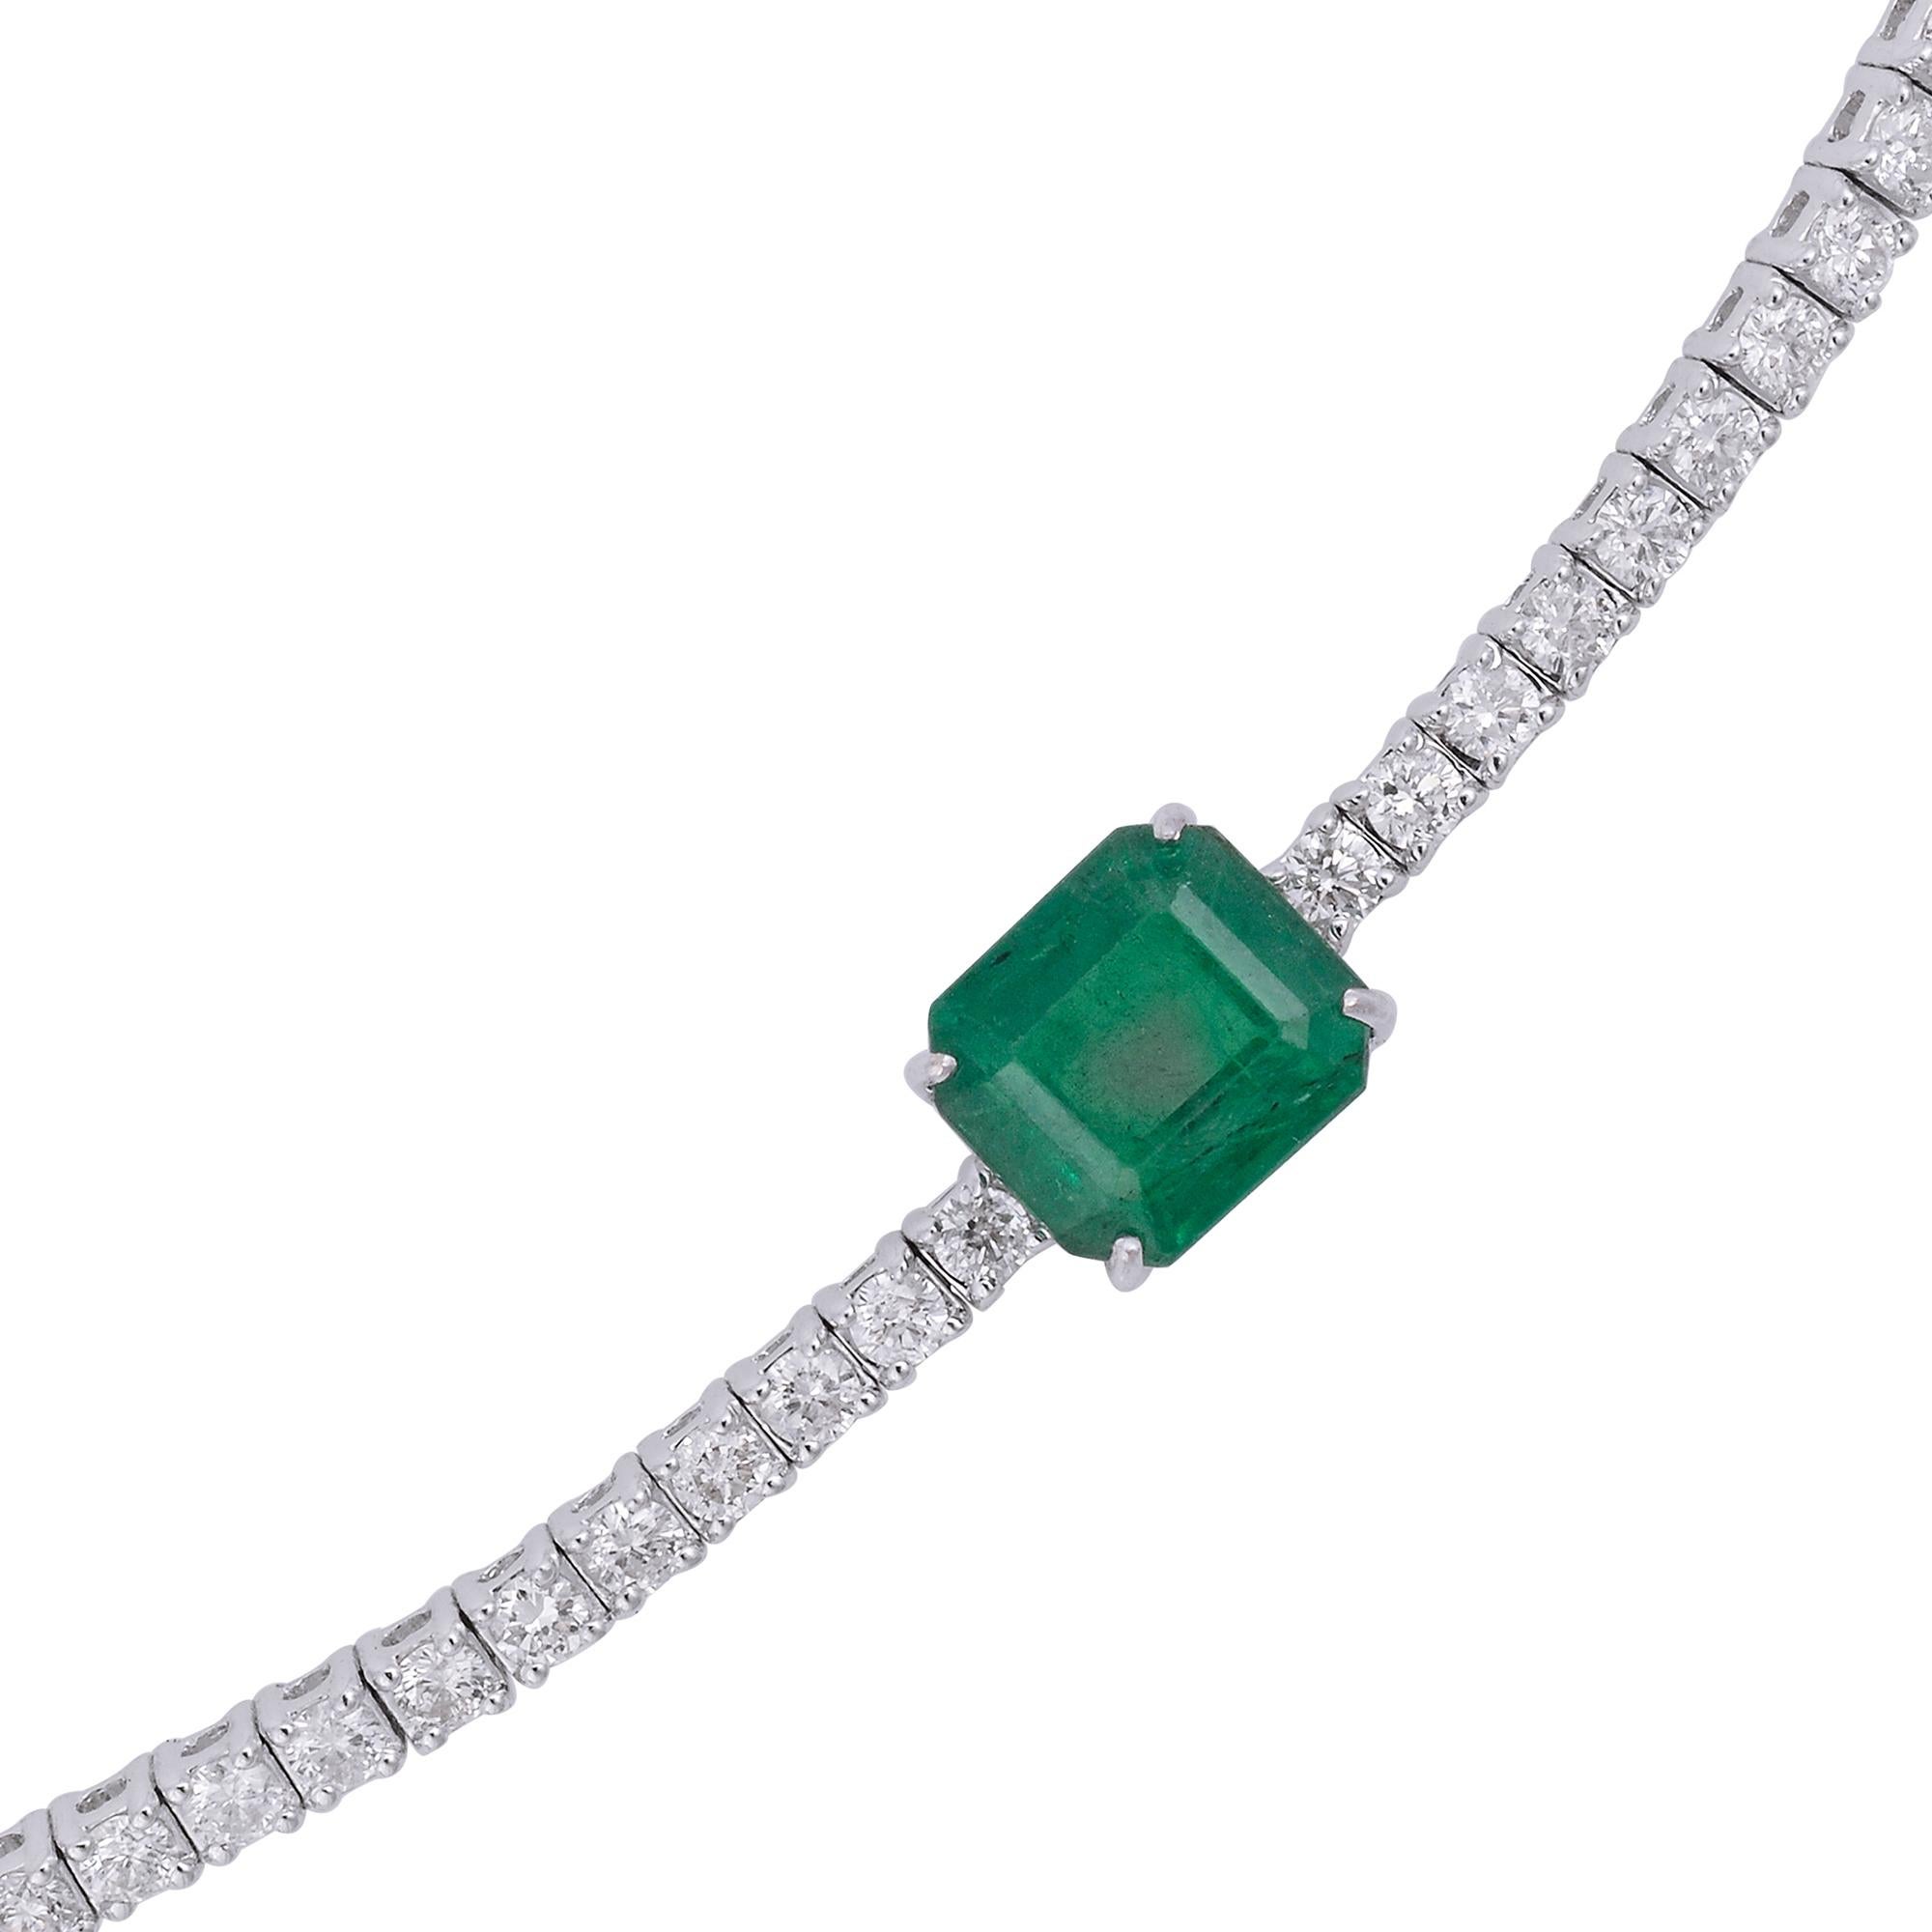 The emerald and diamonds are meticulously set in a solid 18k white gold choker-style necklace, providing a luxurious and enduring setting that perfectly enhances their beauty. The white gold setting not only complements the gemstones and diamonds